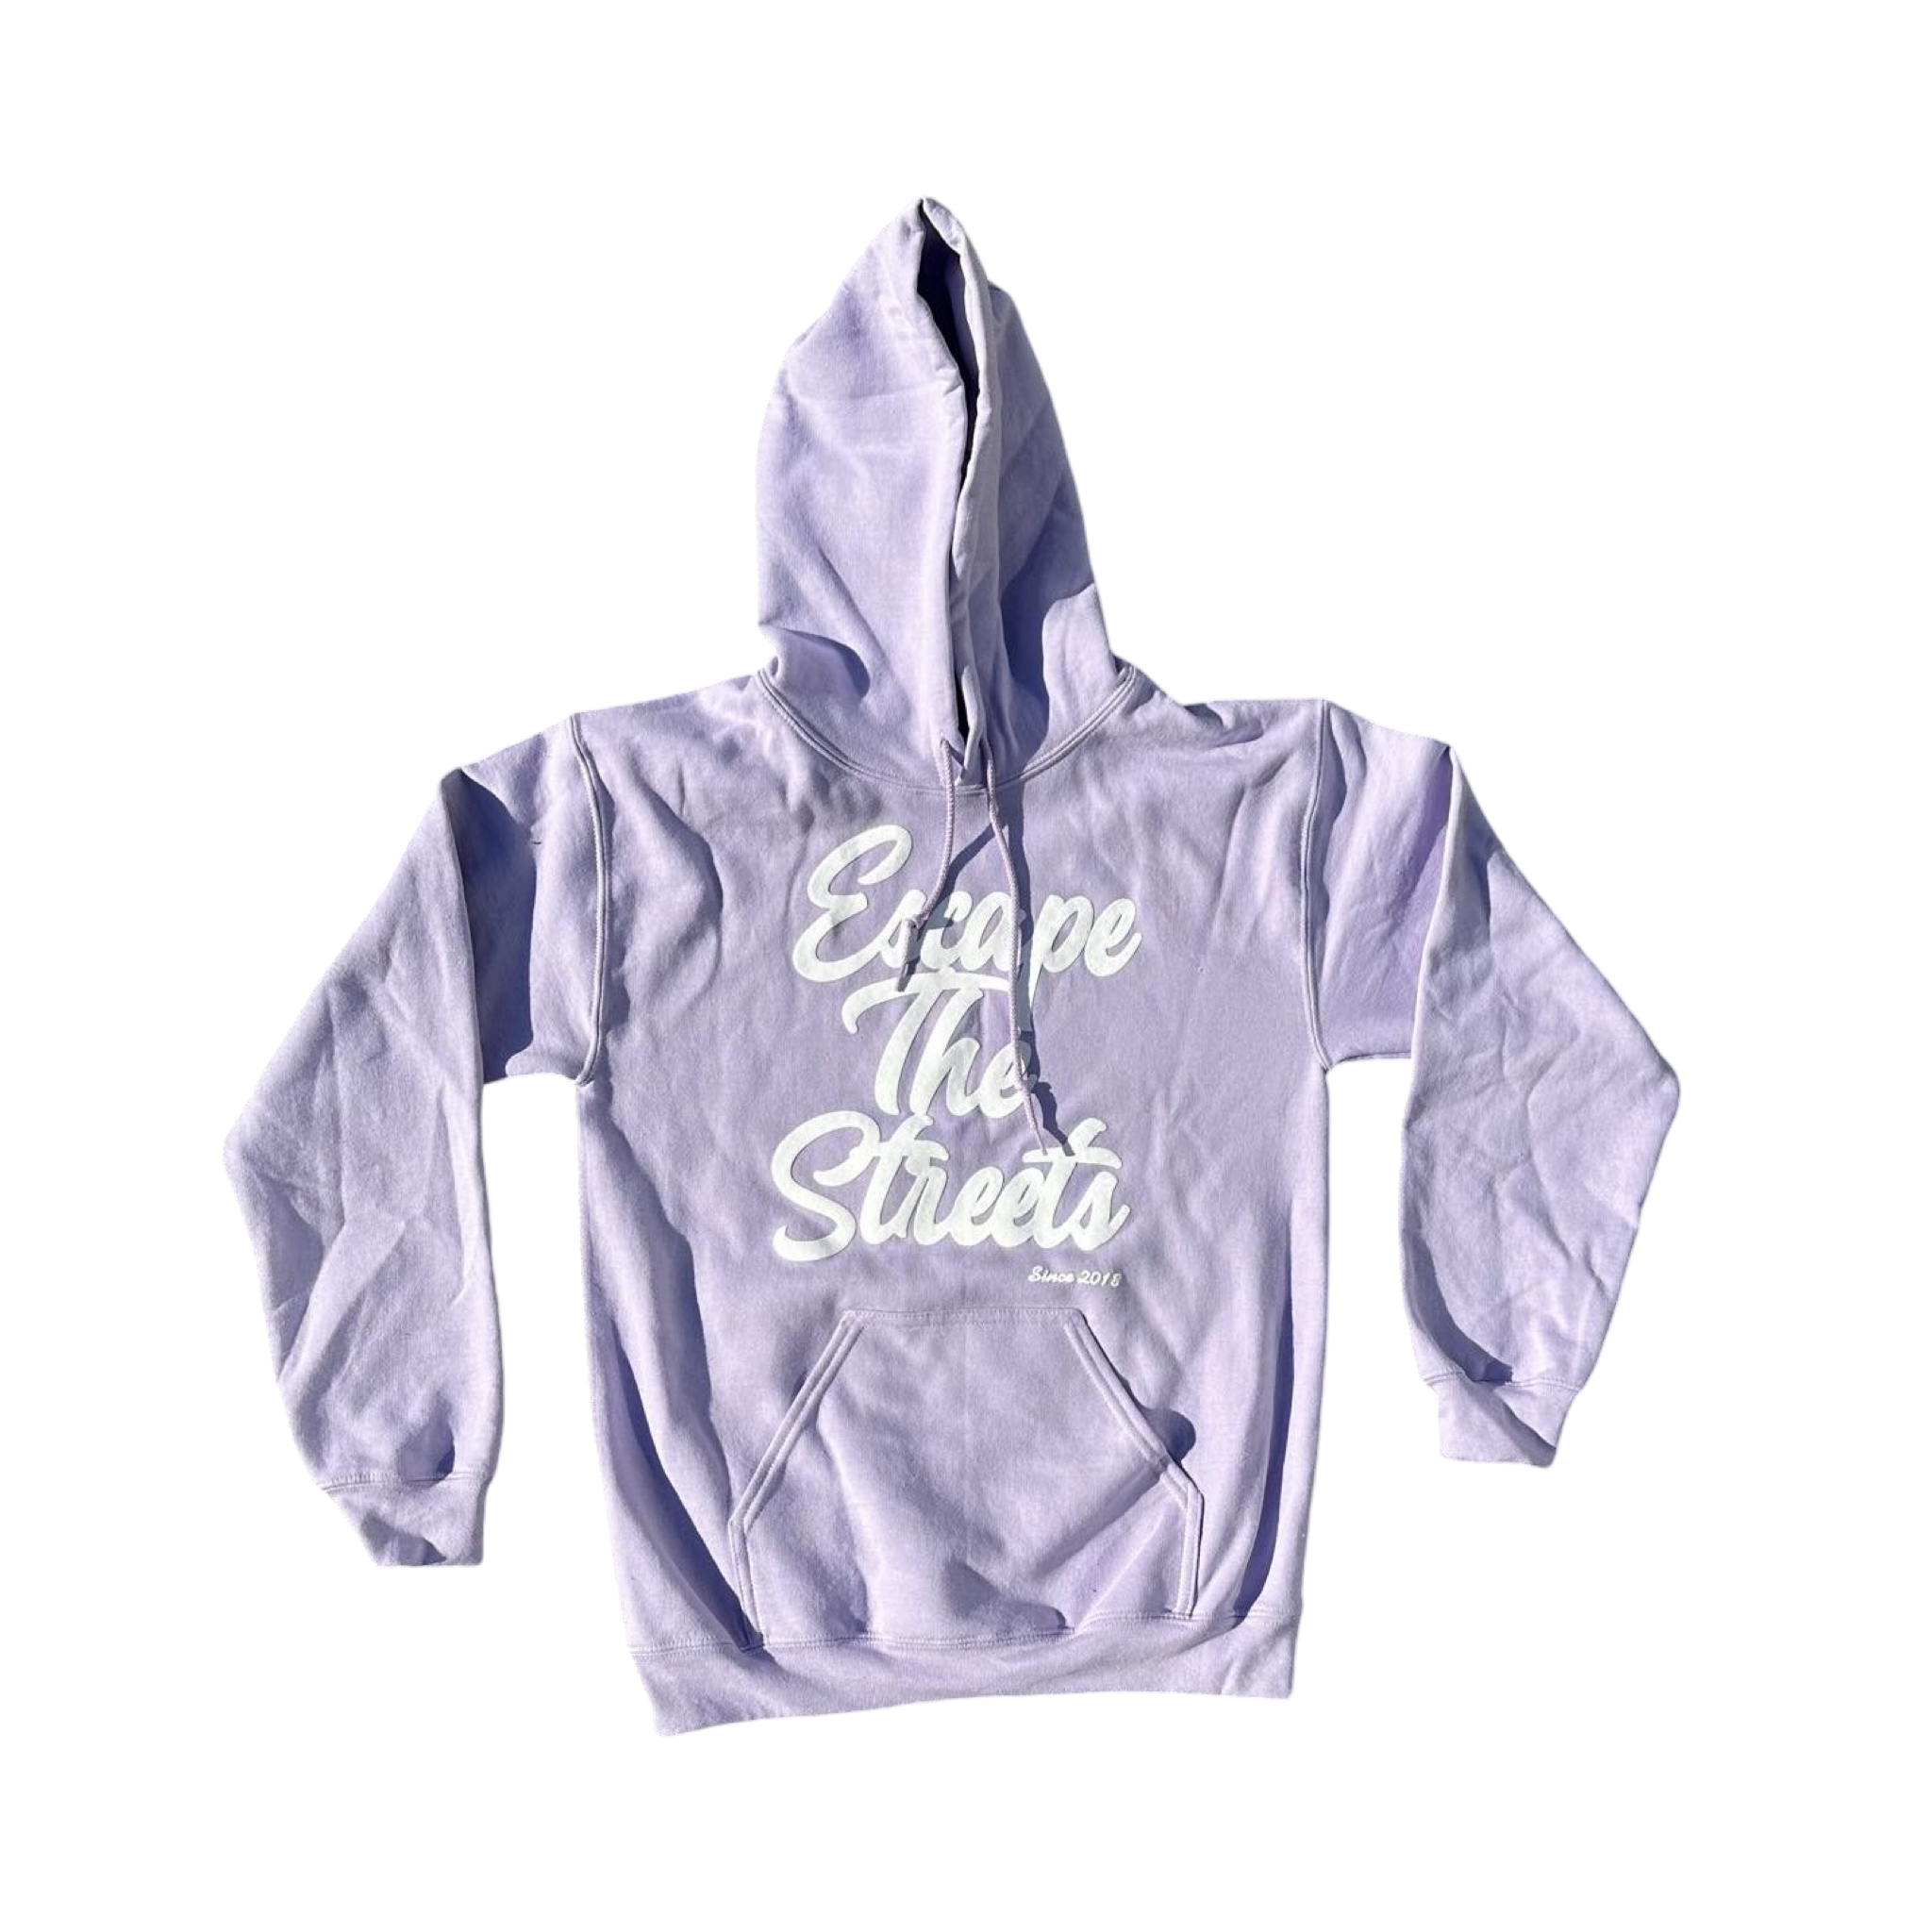 Orchid/white EscapeTheStreets Hoodie